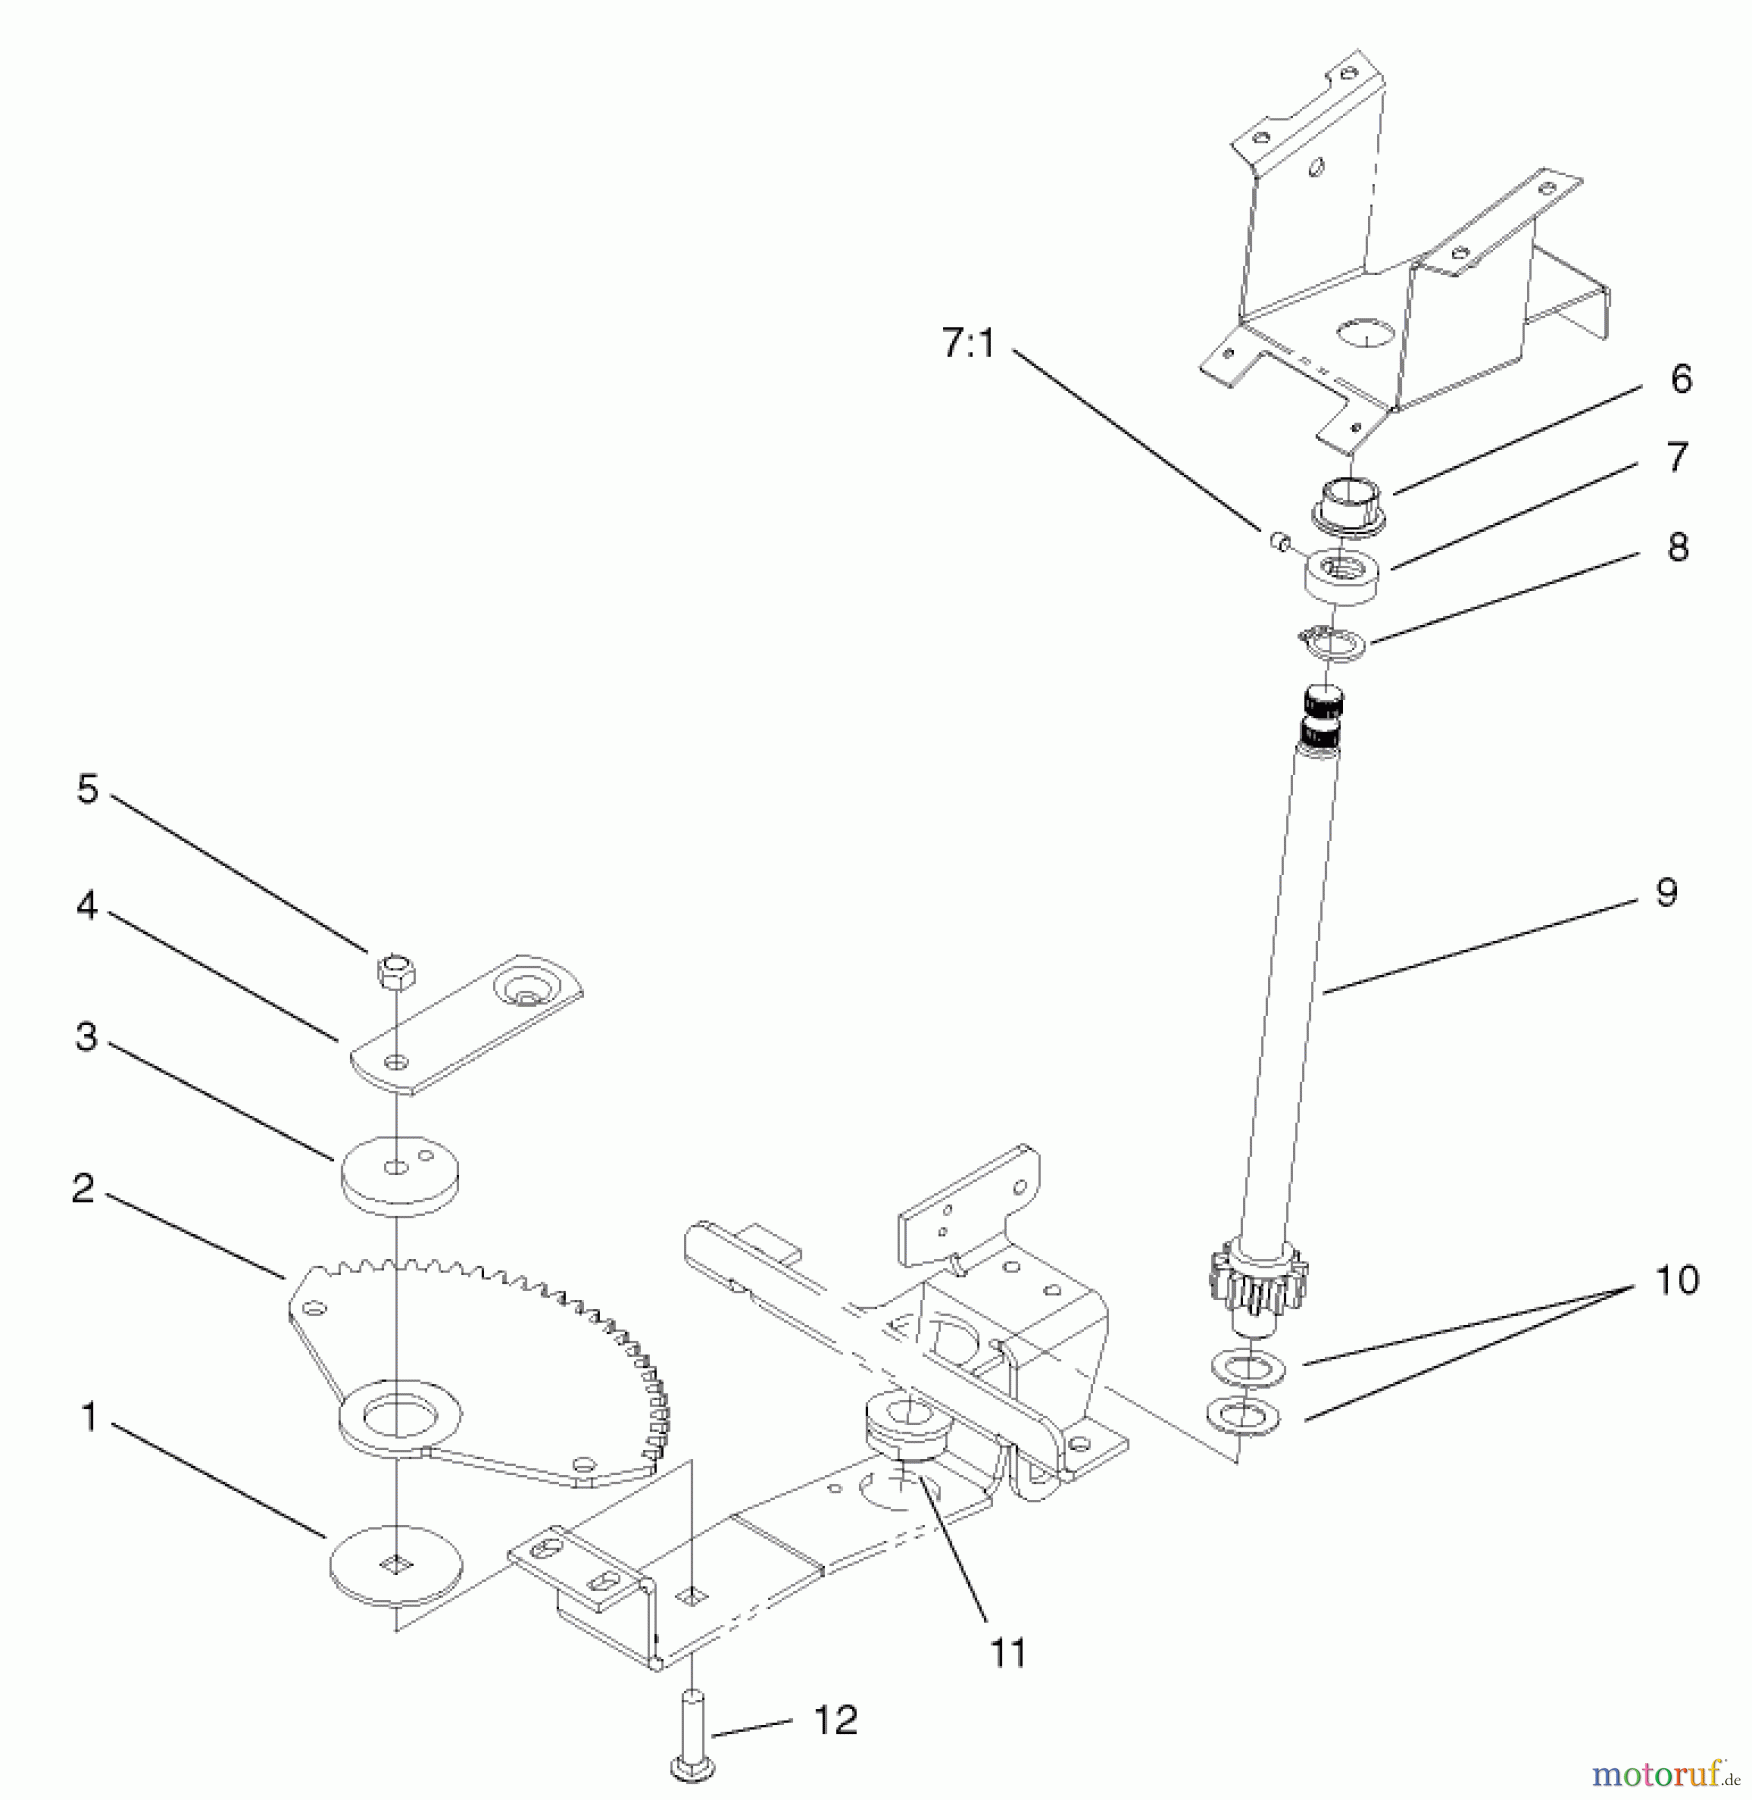  Toro Neu Mowers, Lawn & Garden Tractor Seite 1 72052 (266-H) - Toro 266-H Lawn and Garden Tractor, 2002 (220000001-220999999) LOWER STEERING ASSEMBLY